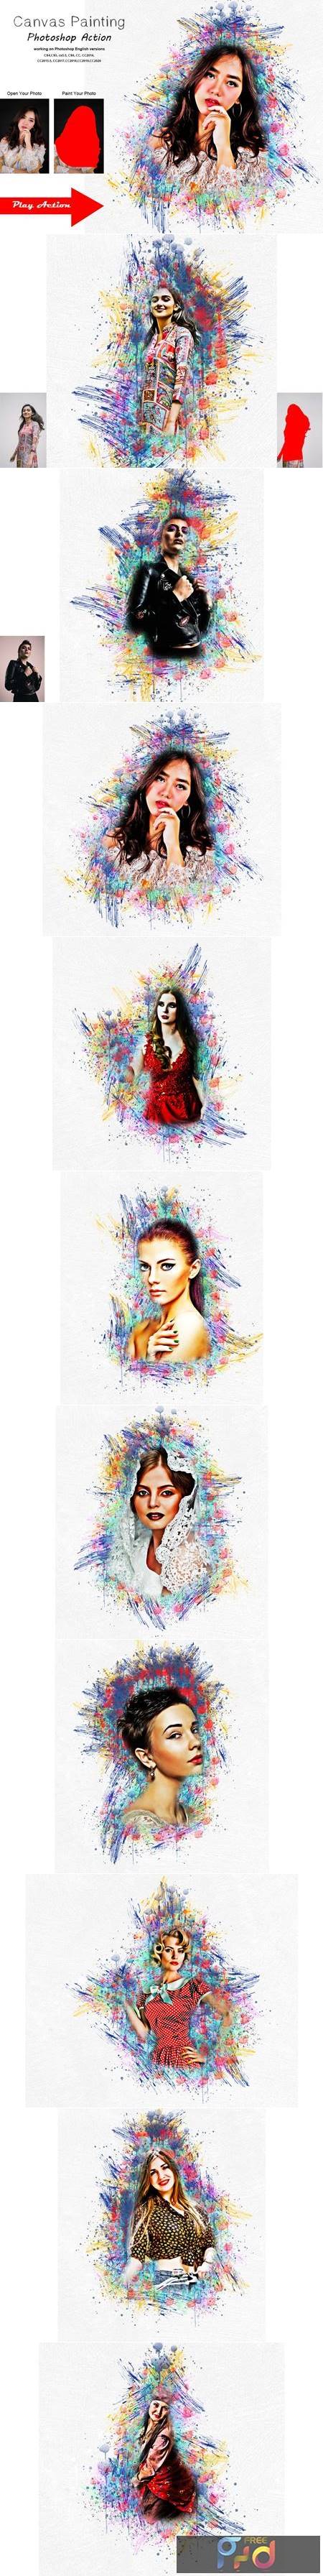 Canvas Painting Photoshop Action 5370490 1